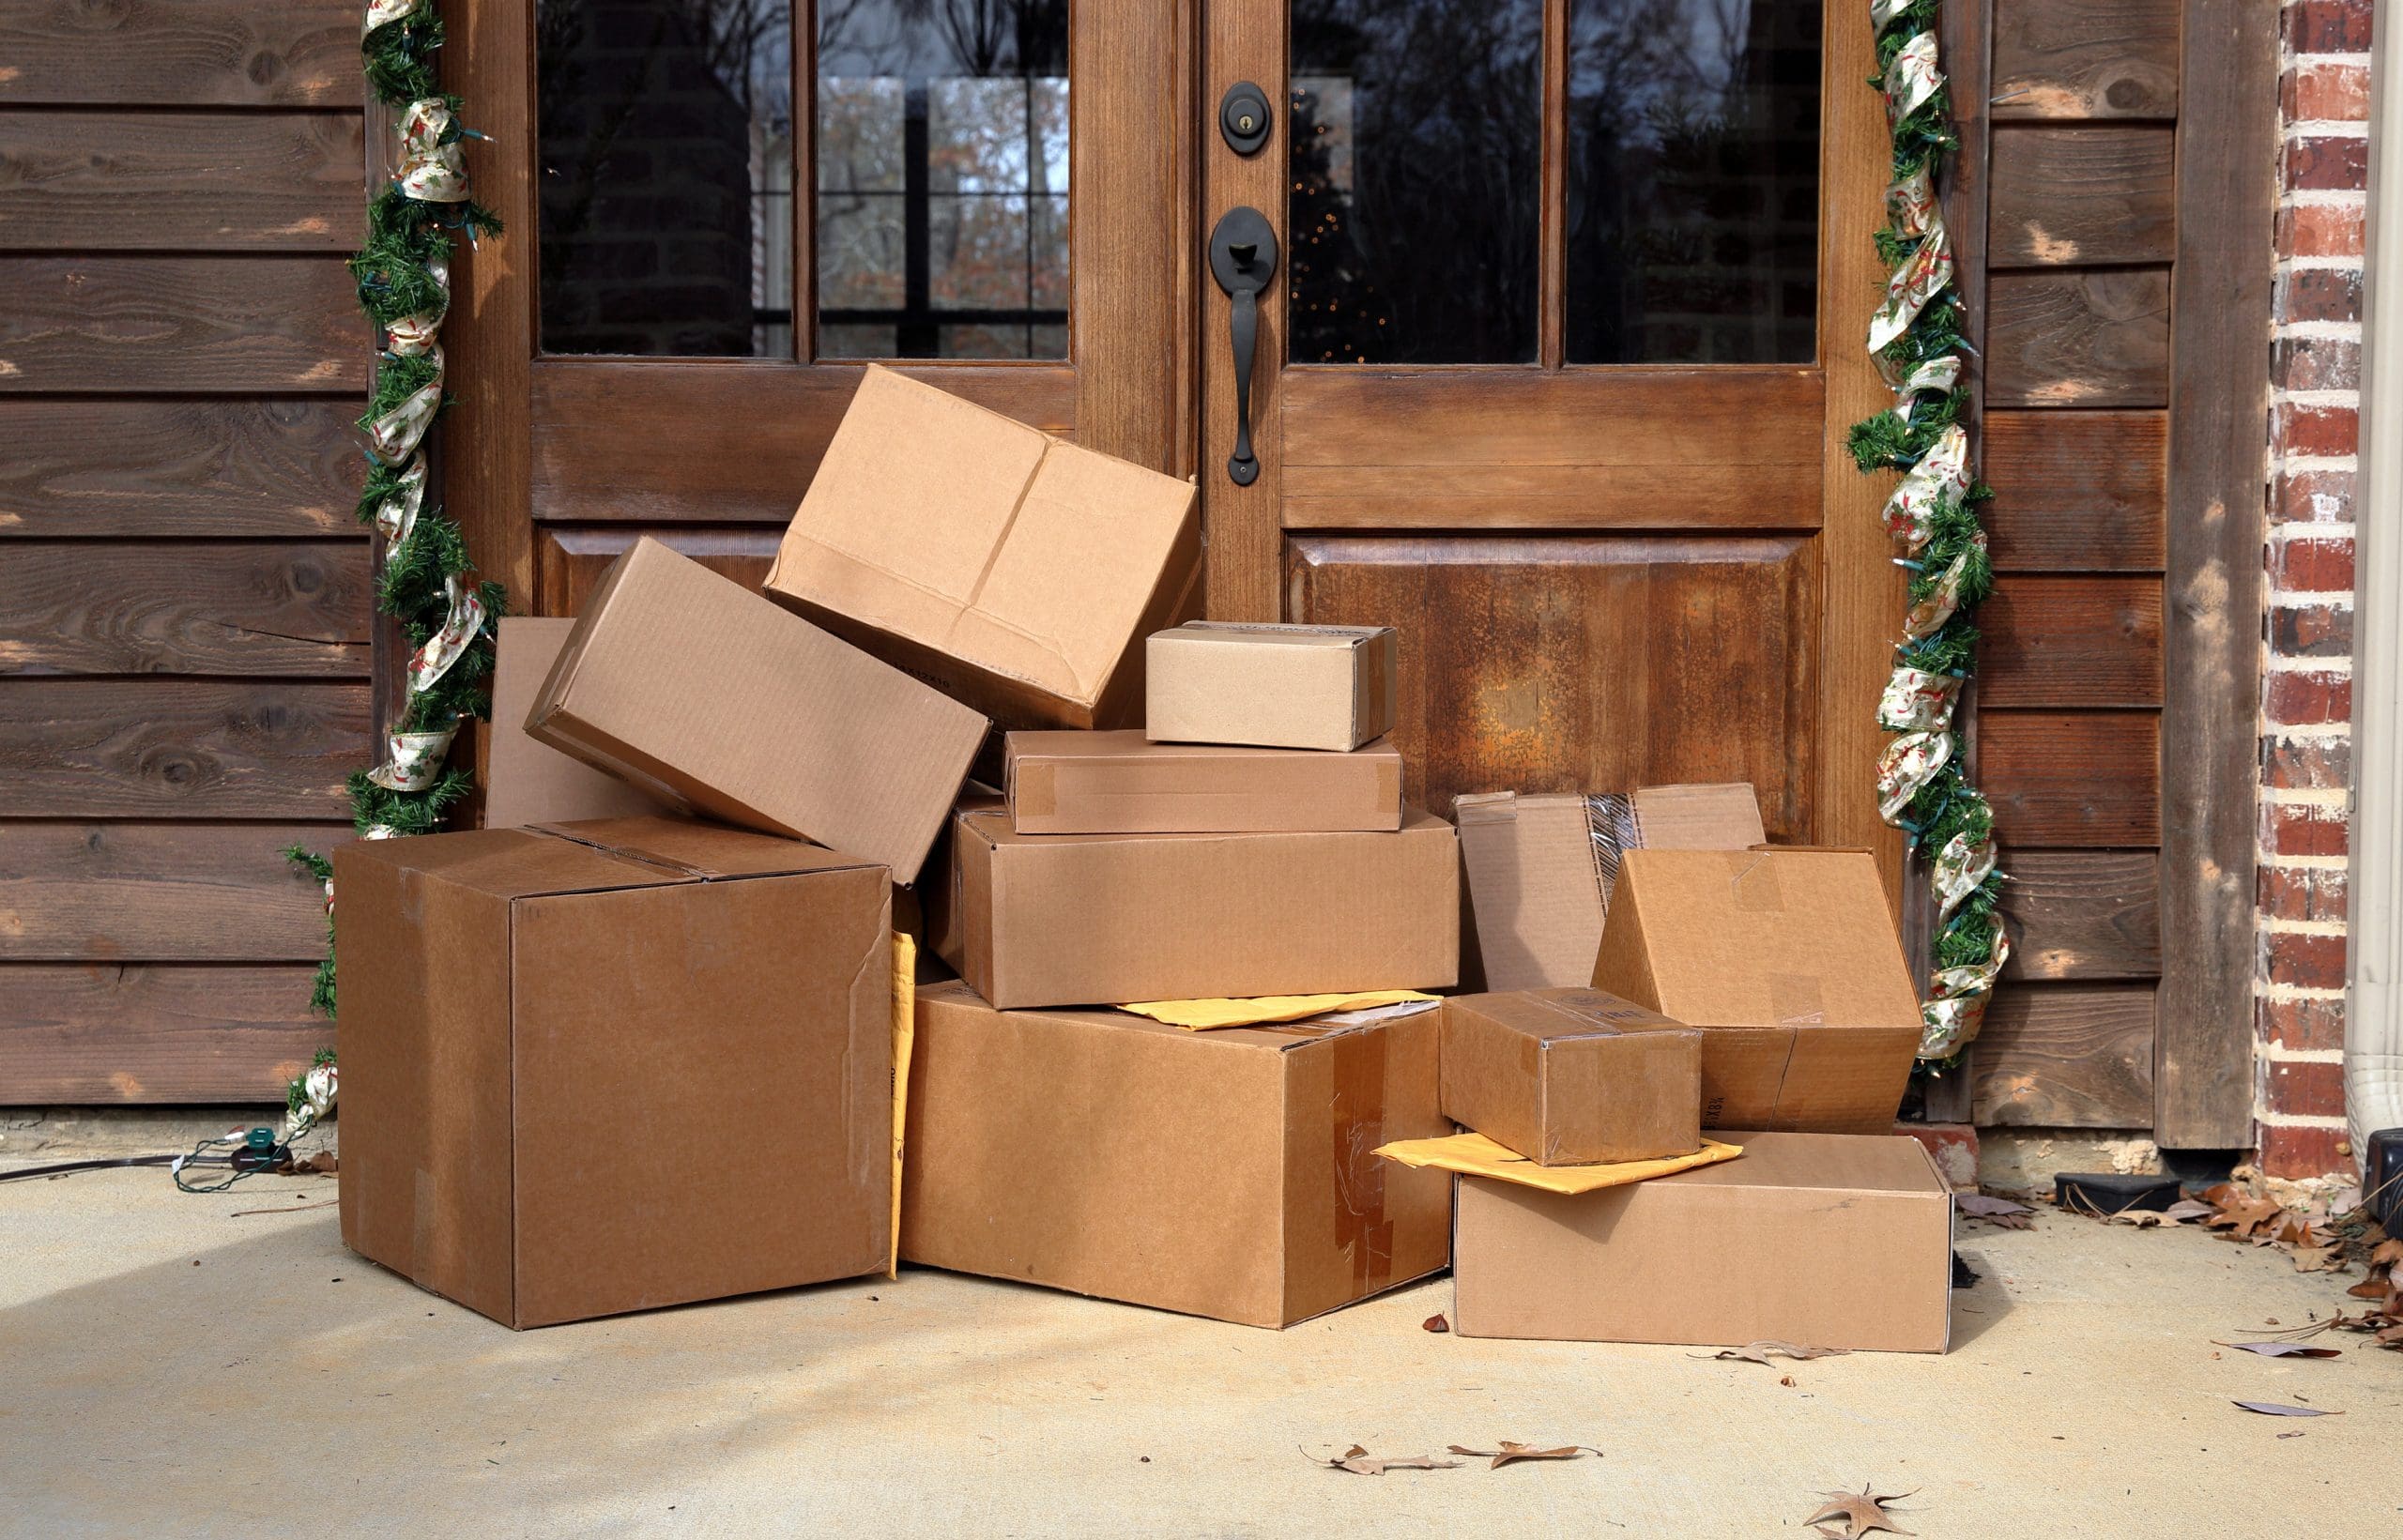 Featured image for “How to Prevent Package Theft”